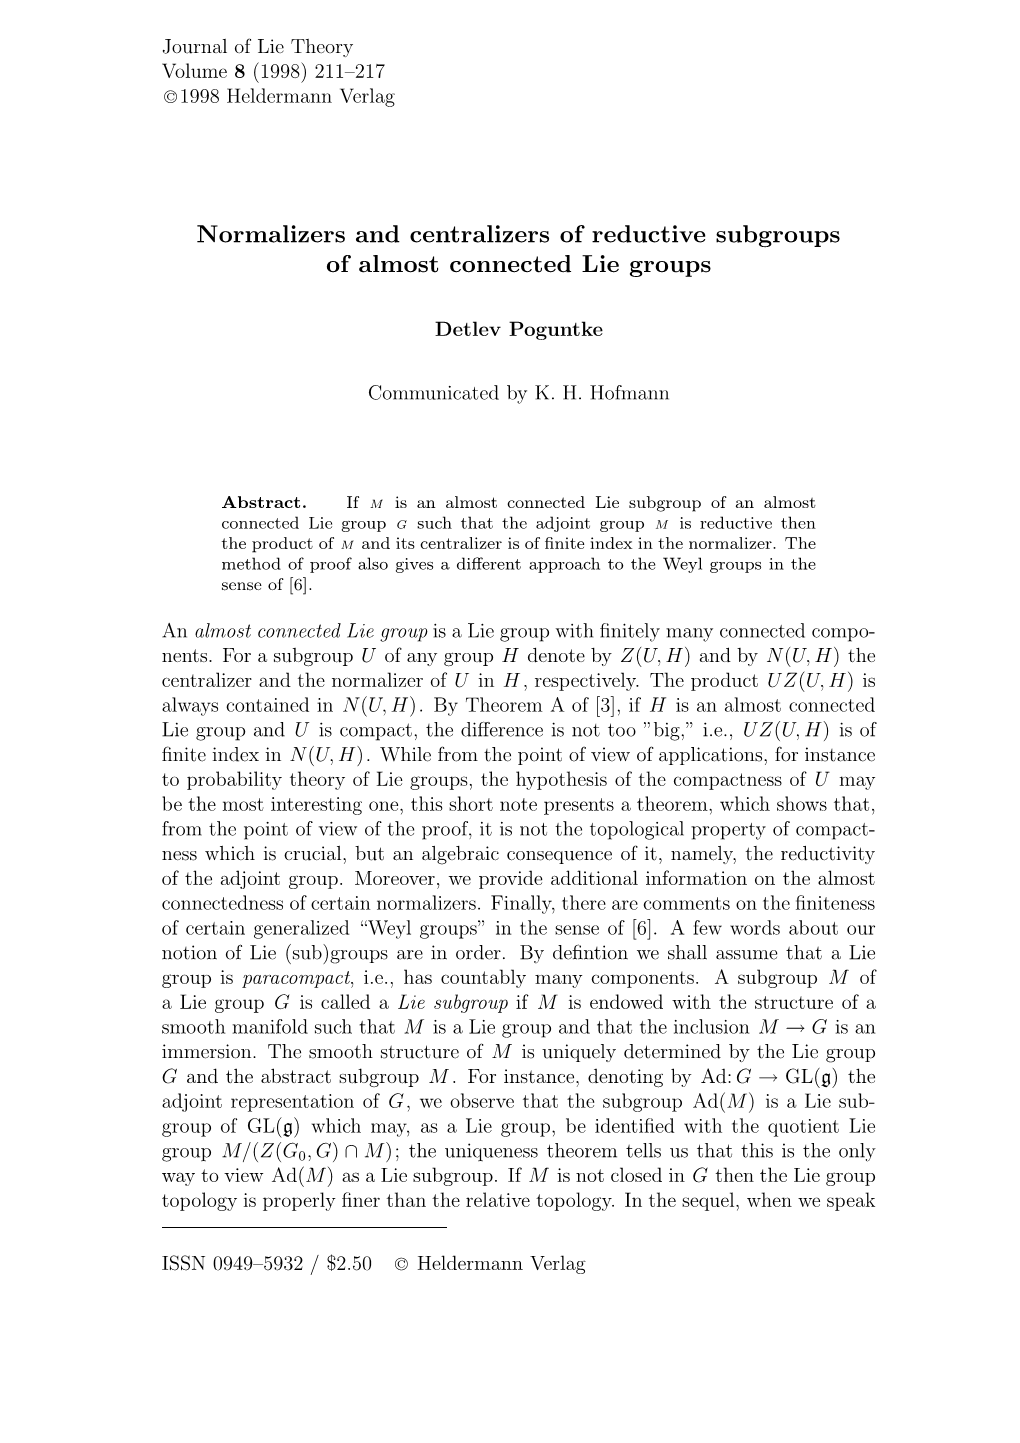 Normalizers and Centralizers of Reductive Subgroups of Almost Connected Lie Groups